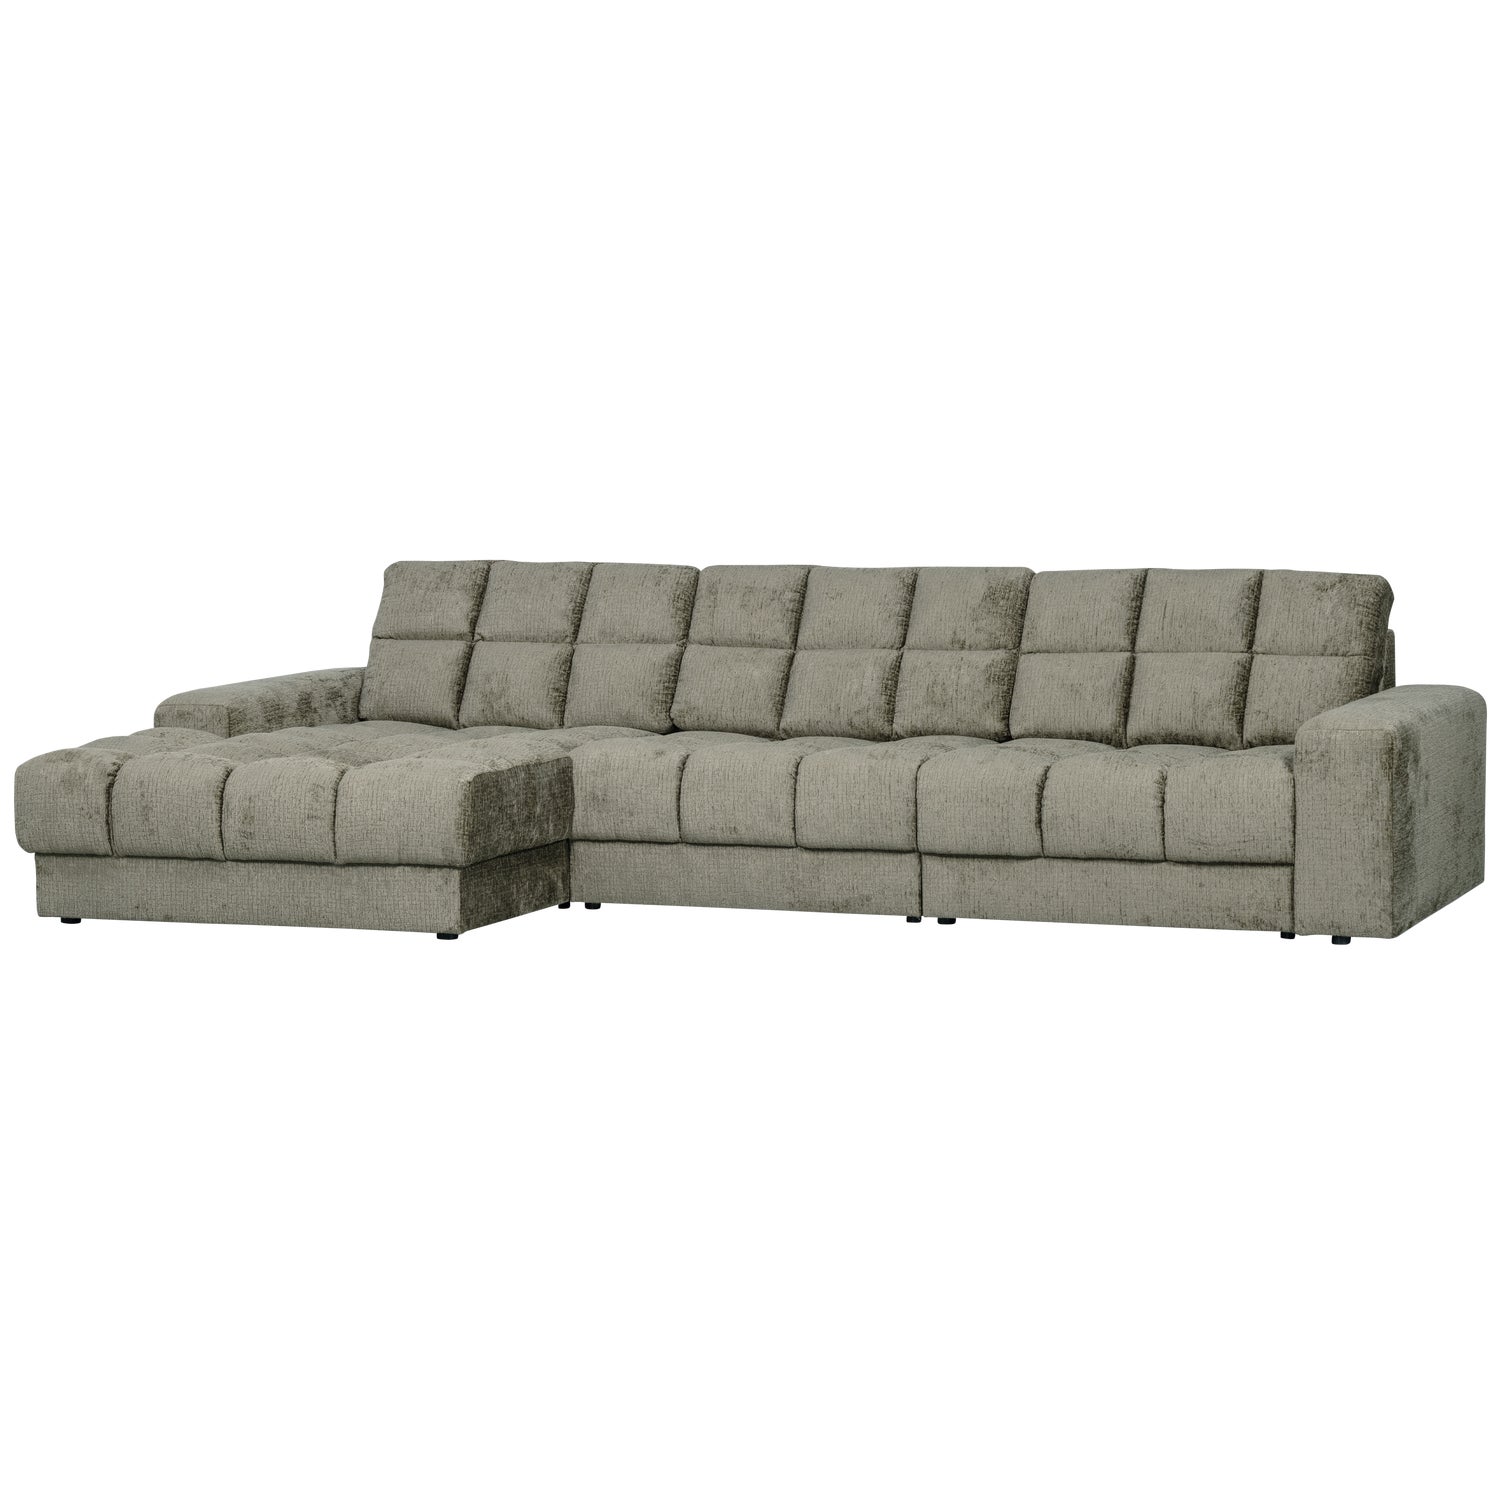 379012-FR-02_VS_WE_Second_date_chaise_longue_links_structure_velvet_frost_SA.png?auto=webp&format=png&width=1500&height=1500